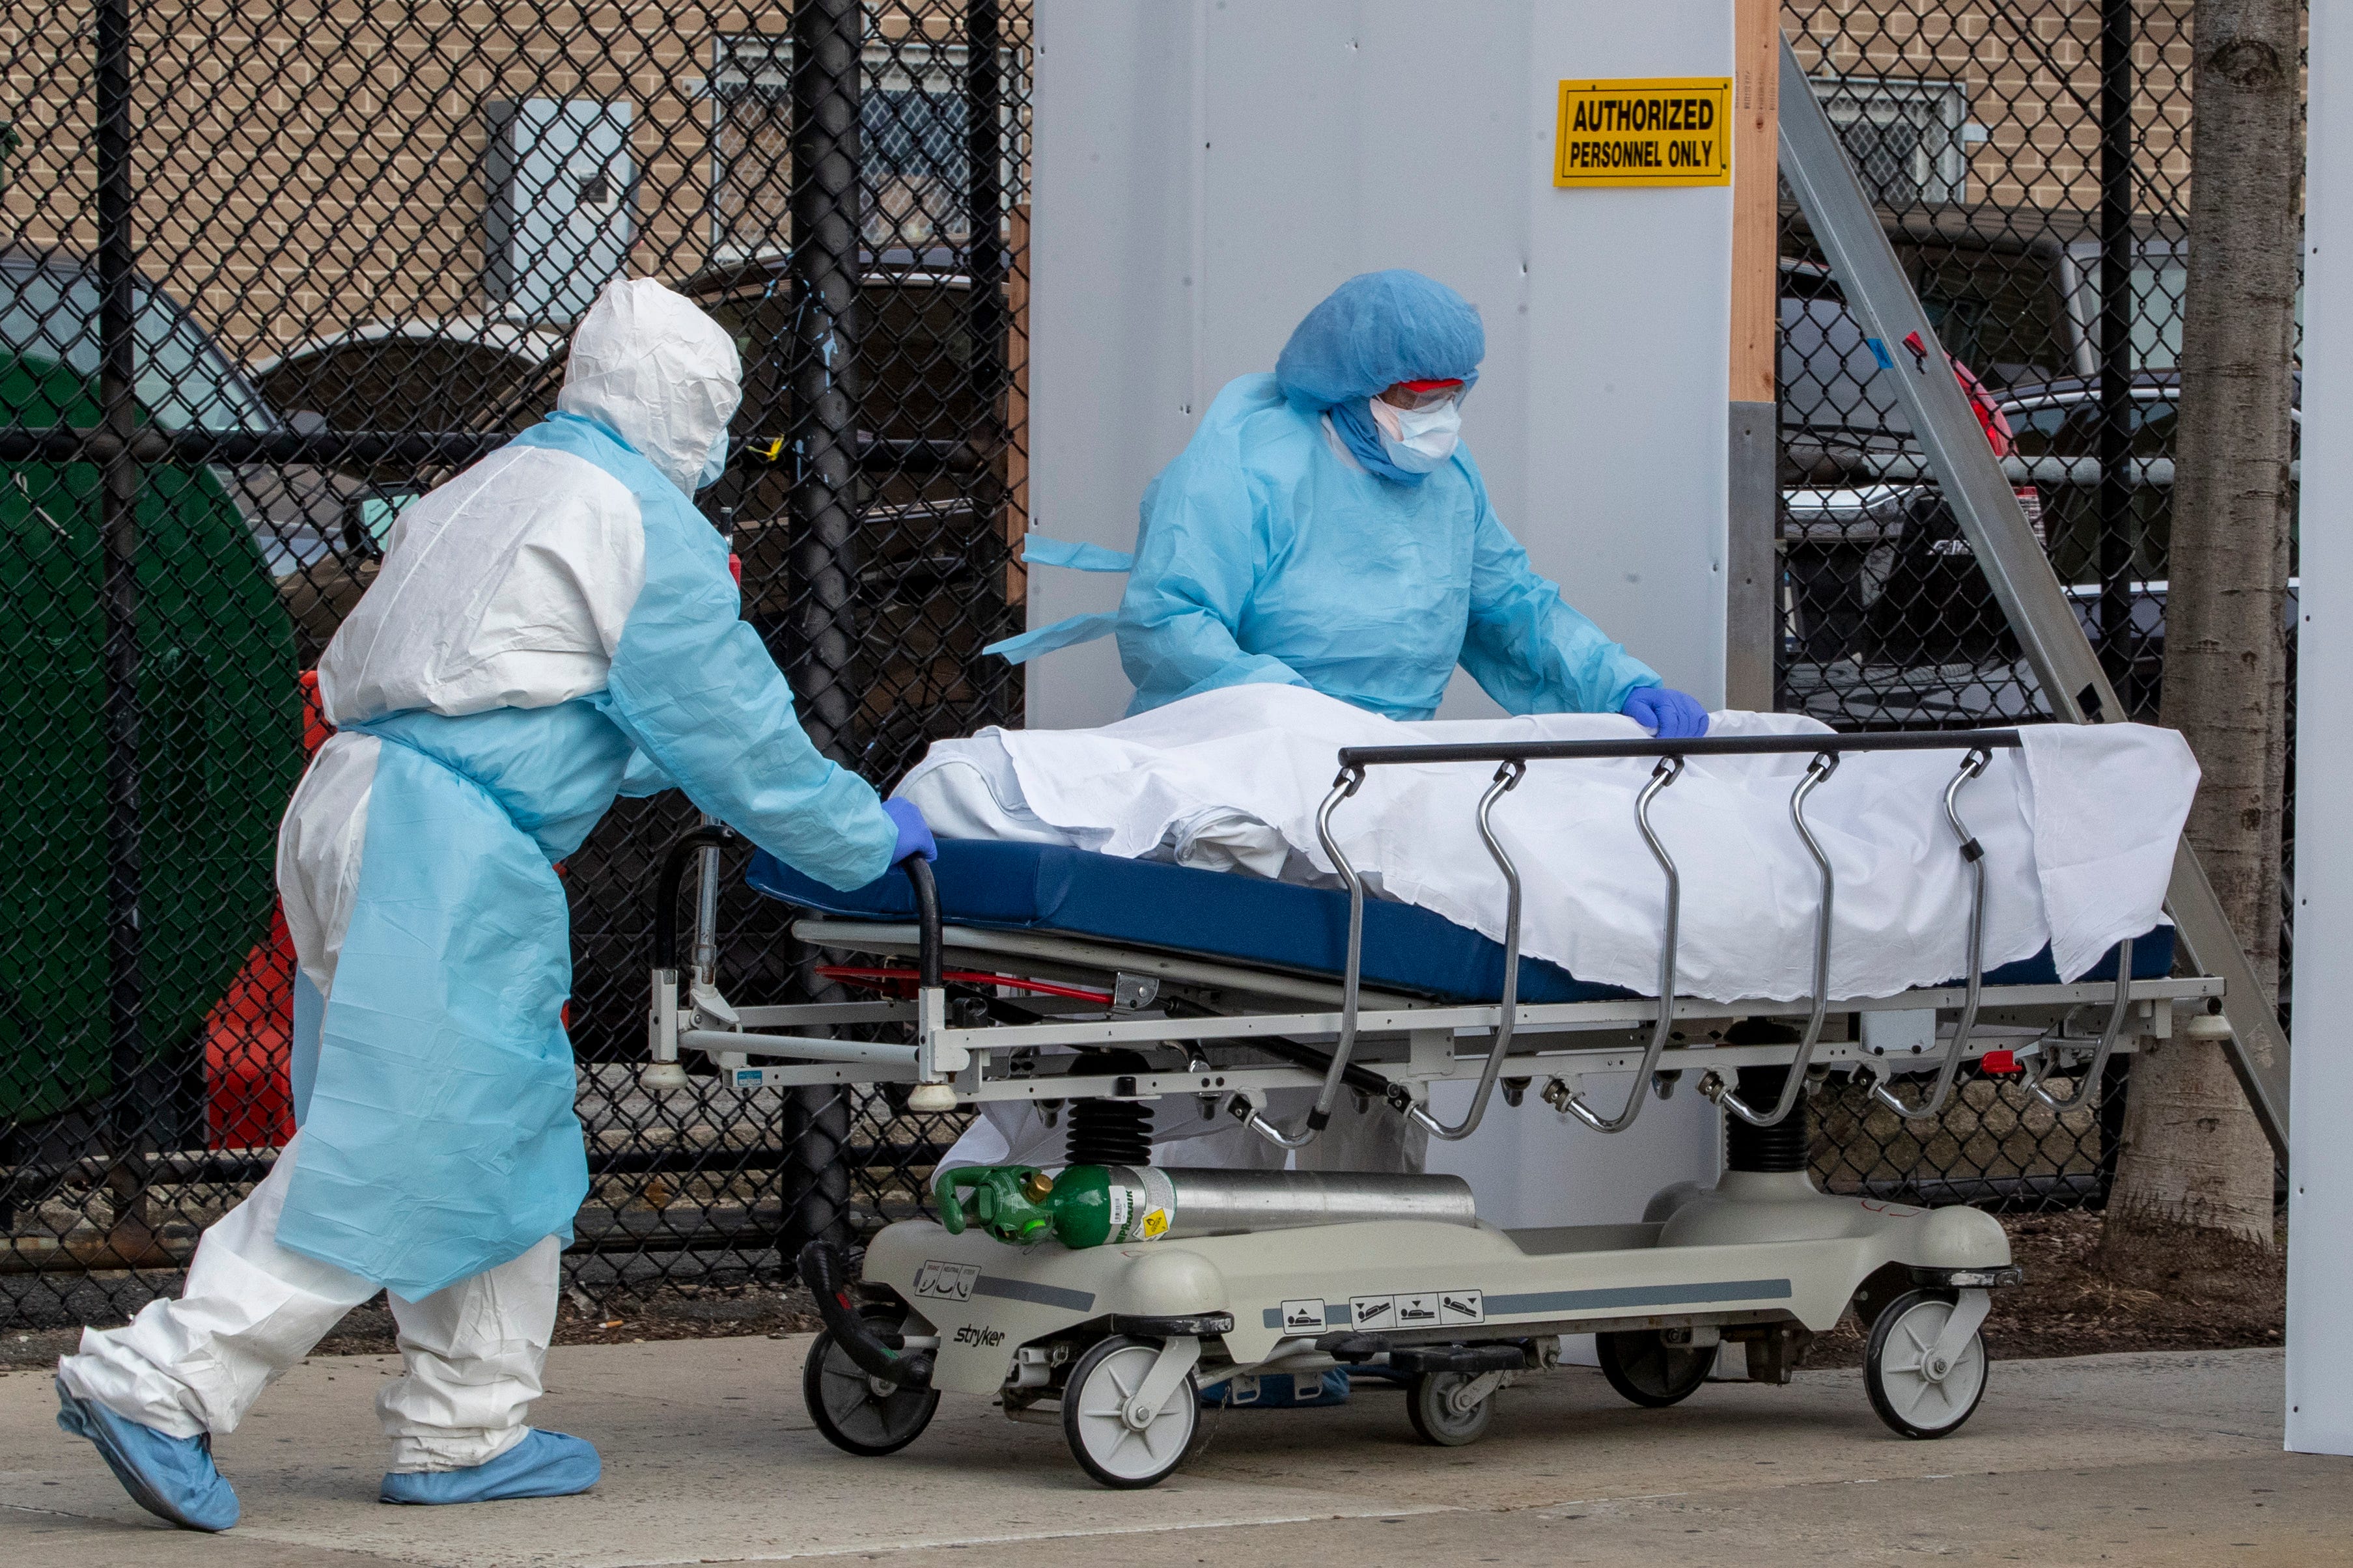 Medical personnel wearing personal protective equipment remove a body from the Wyckoff Heights Medical Center to refrigerated containers parked outside, Thursday, April 2, 2020, in the Brooklyn borough of New York. As coronavirus hot spots and death tolls flared around the U.S., the nation's biggest city was the hardest hit of the all, with bodies loaded onto refrigerated morgue trucks by gurney and forklift outside overwhelmed hospitals, in full view of passing motorists.